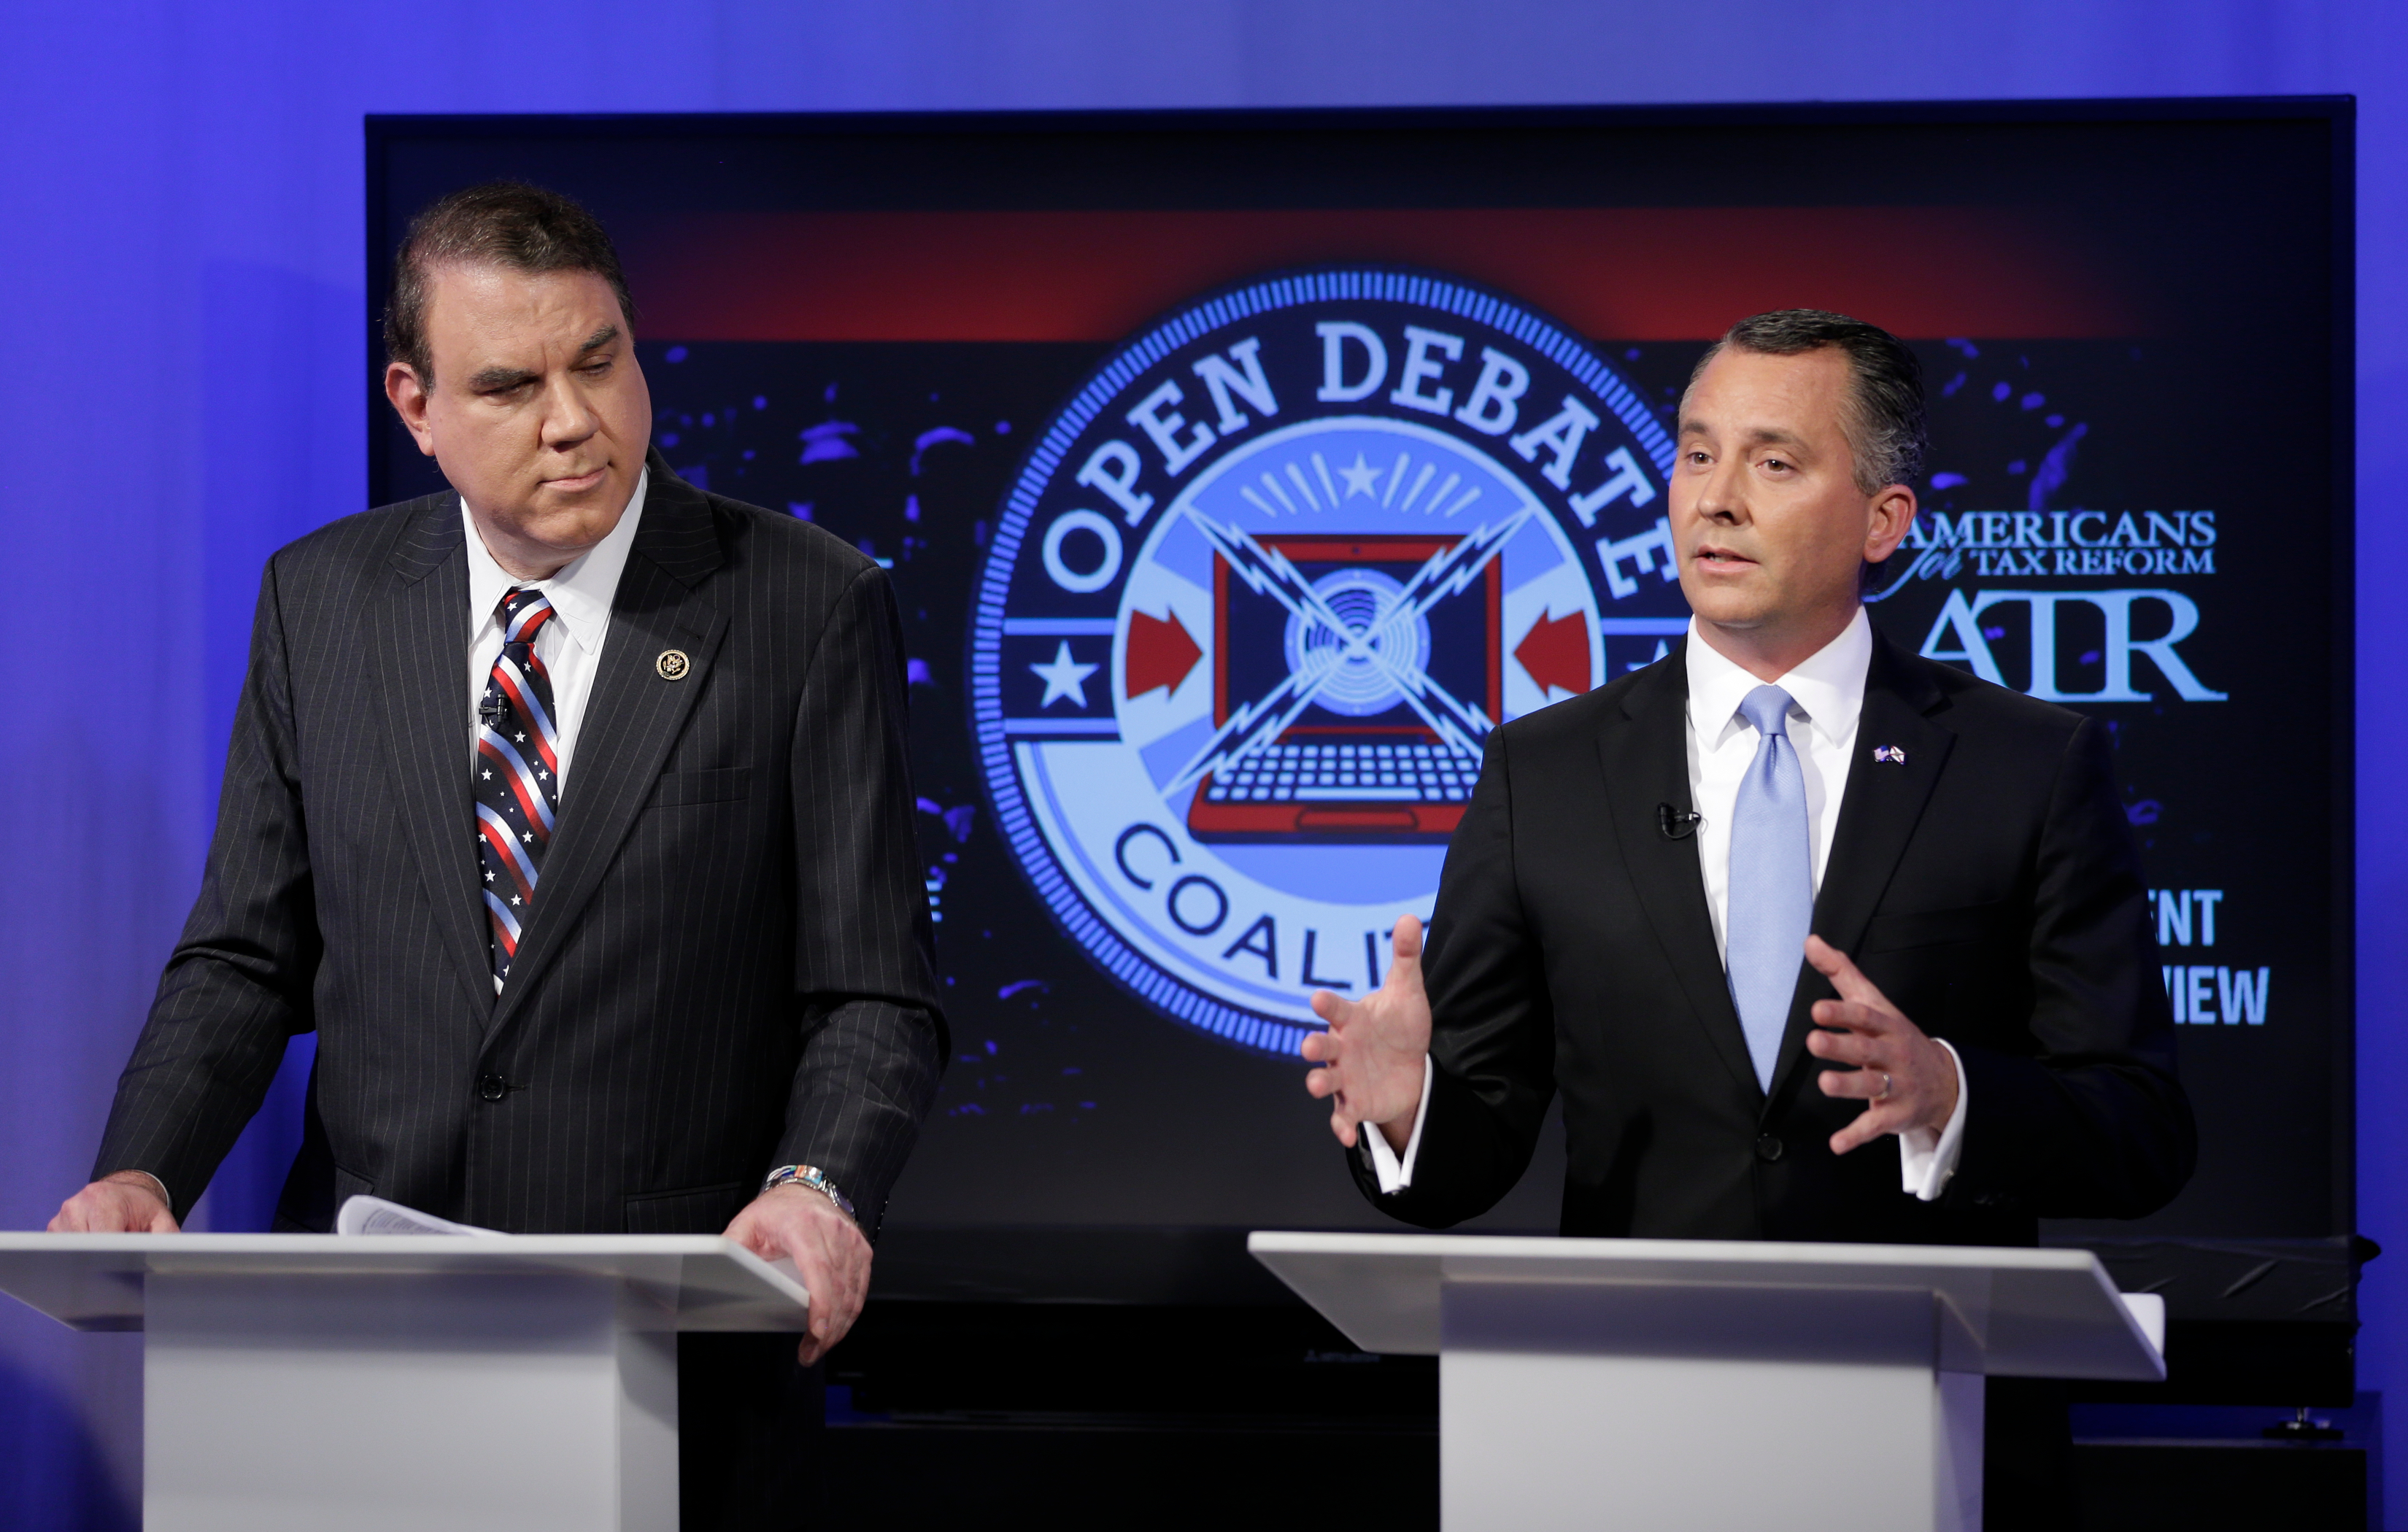 Rep. Alan Grayson, D-Fla., left, and Rep. David Jolly, R-Fla., take part in an open debate for the U.S. Senate in Orlando in April 2016. PolitiFact recently announced the two representatives would serve as ‘reader advocates’ and critique the site’s work, but quickly rescinded the offer to Rep. Grayson after criticism from readers